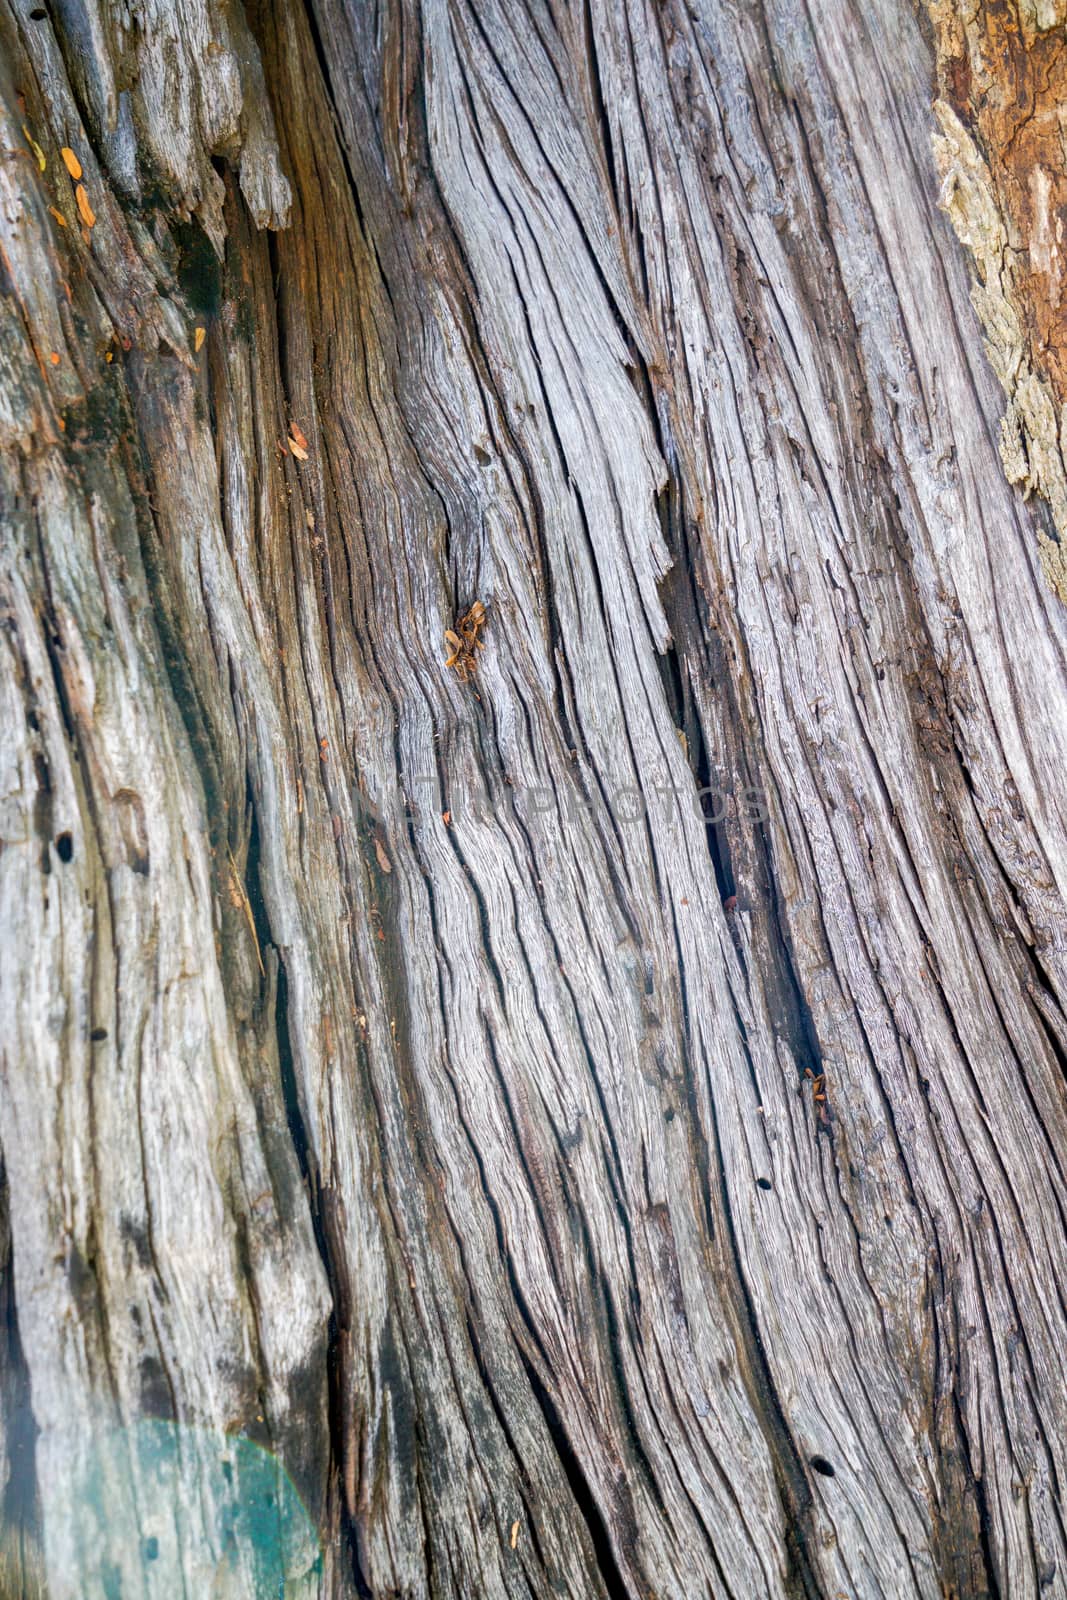 Texture & details of of tree trunk by Alicephoto